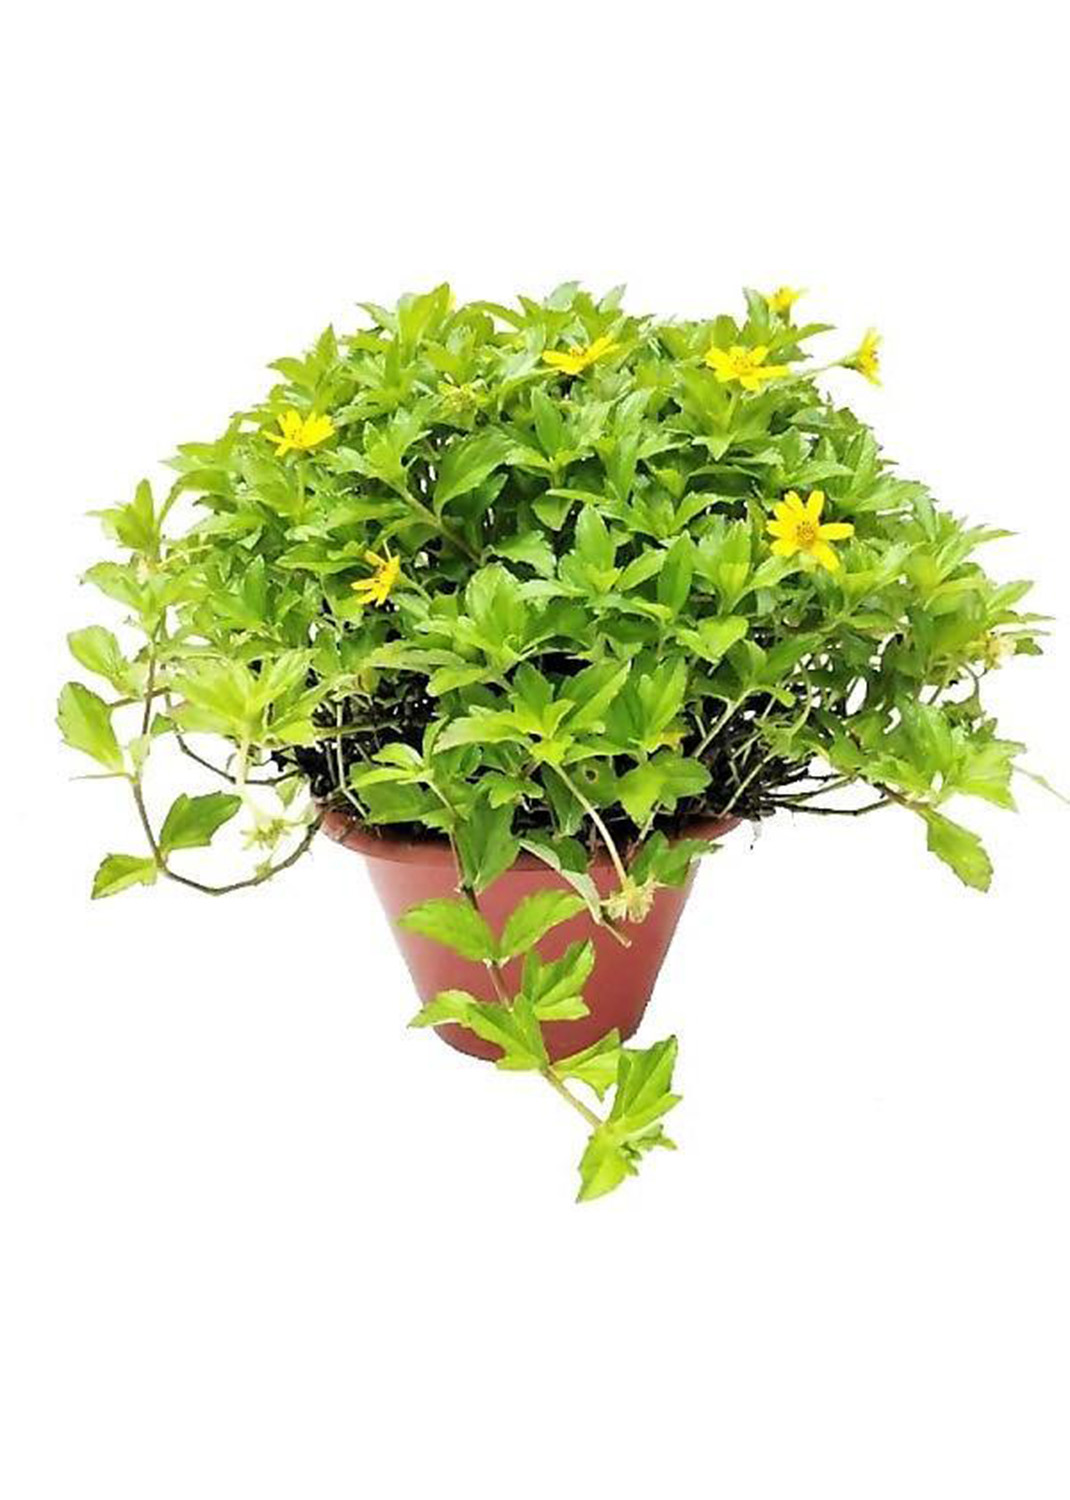 Wedelia Trilobata, Creeping Daisy or Rabbit Paw (small)   { 25 pieces }